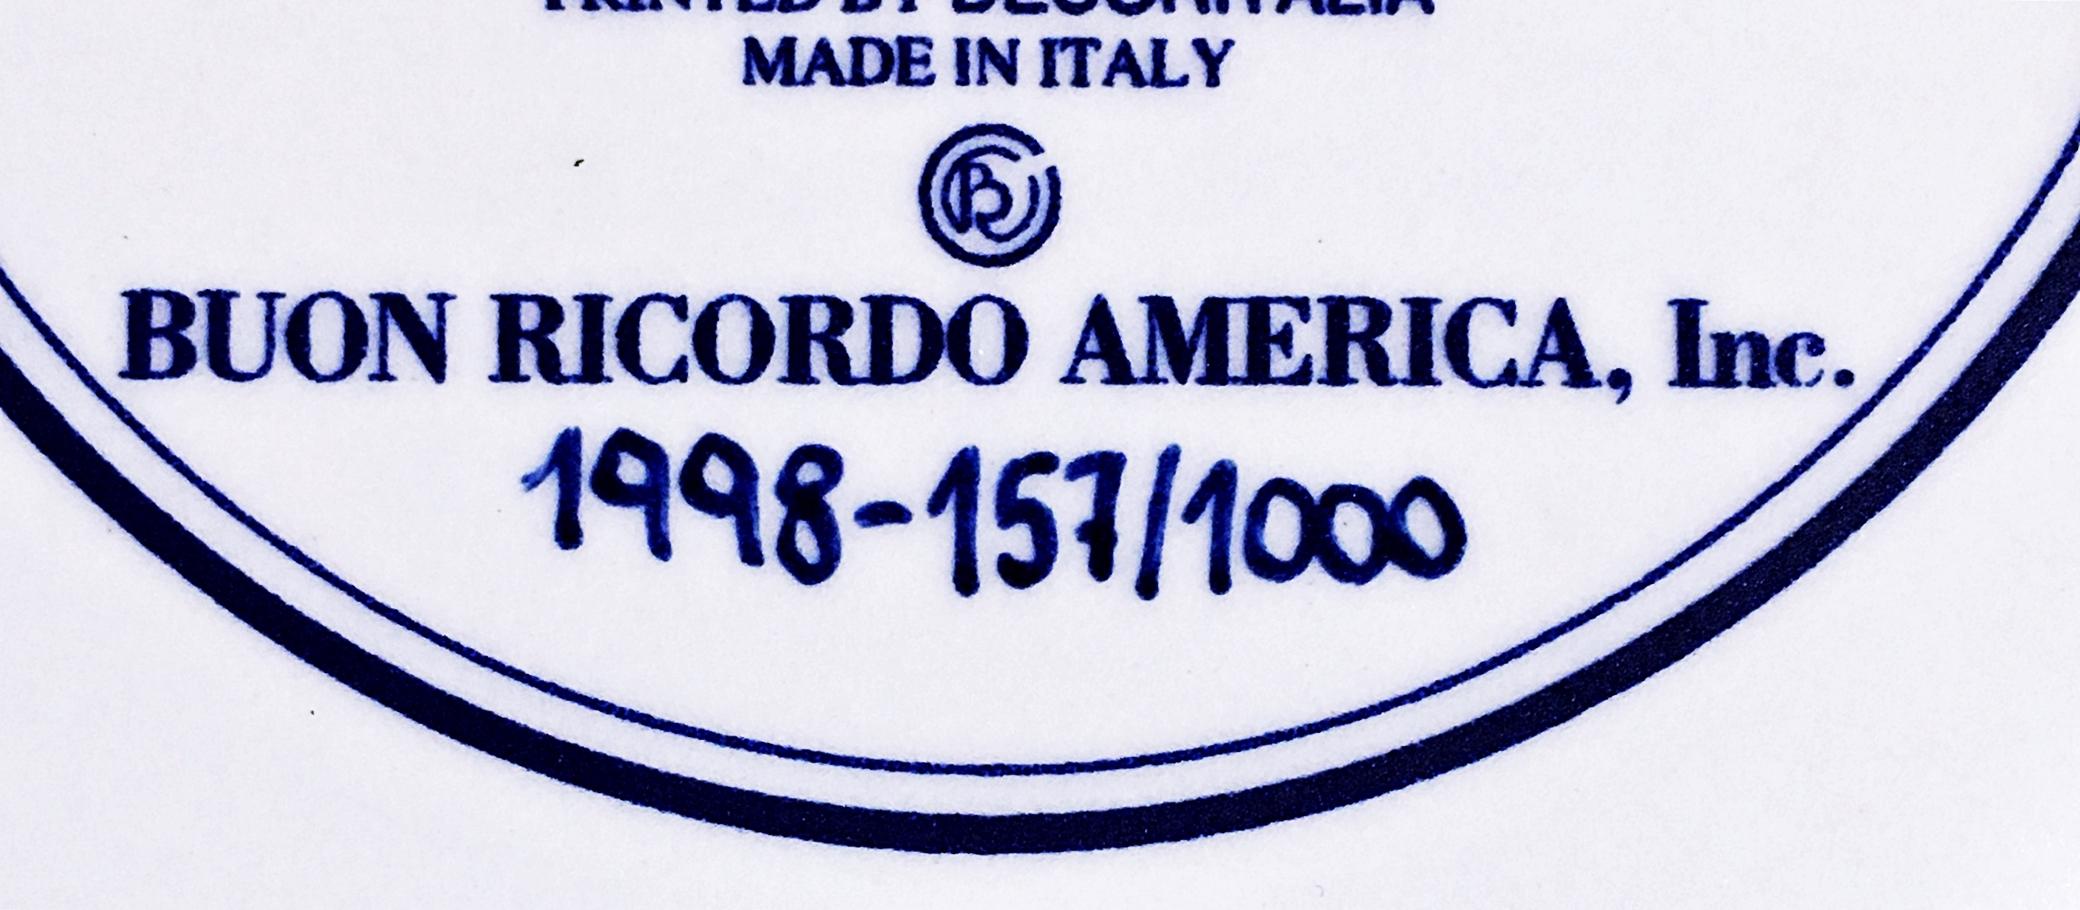 Arman
Filetto Al Barolo - Barolo - New York, NY, 1998
Ceramic Plate
Signed in plate, Artist signature fired into the plate on the front and back and numbered 157 from the edition of 1000. (far fewer made)
10 3/10 inches diameter by 1/4 inches